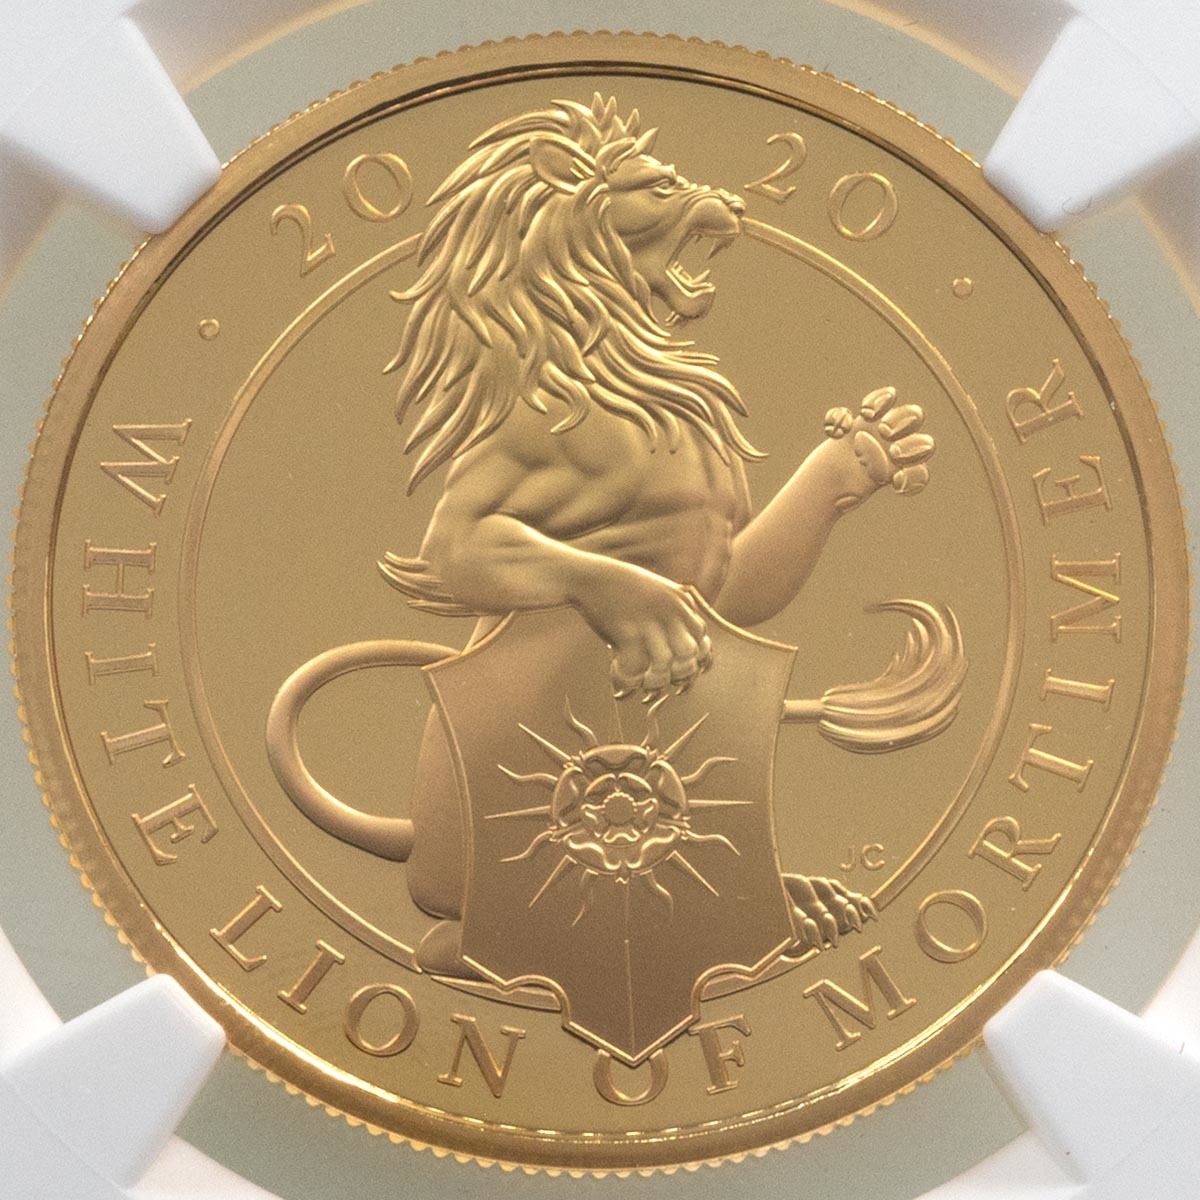 Uk20QWGP 2020 Queen's Beasts White Lion Of Mortimer One Ounce Gold Proof Coin NGC Graded PF 70 Ultra Cameo Reverse